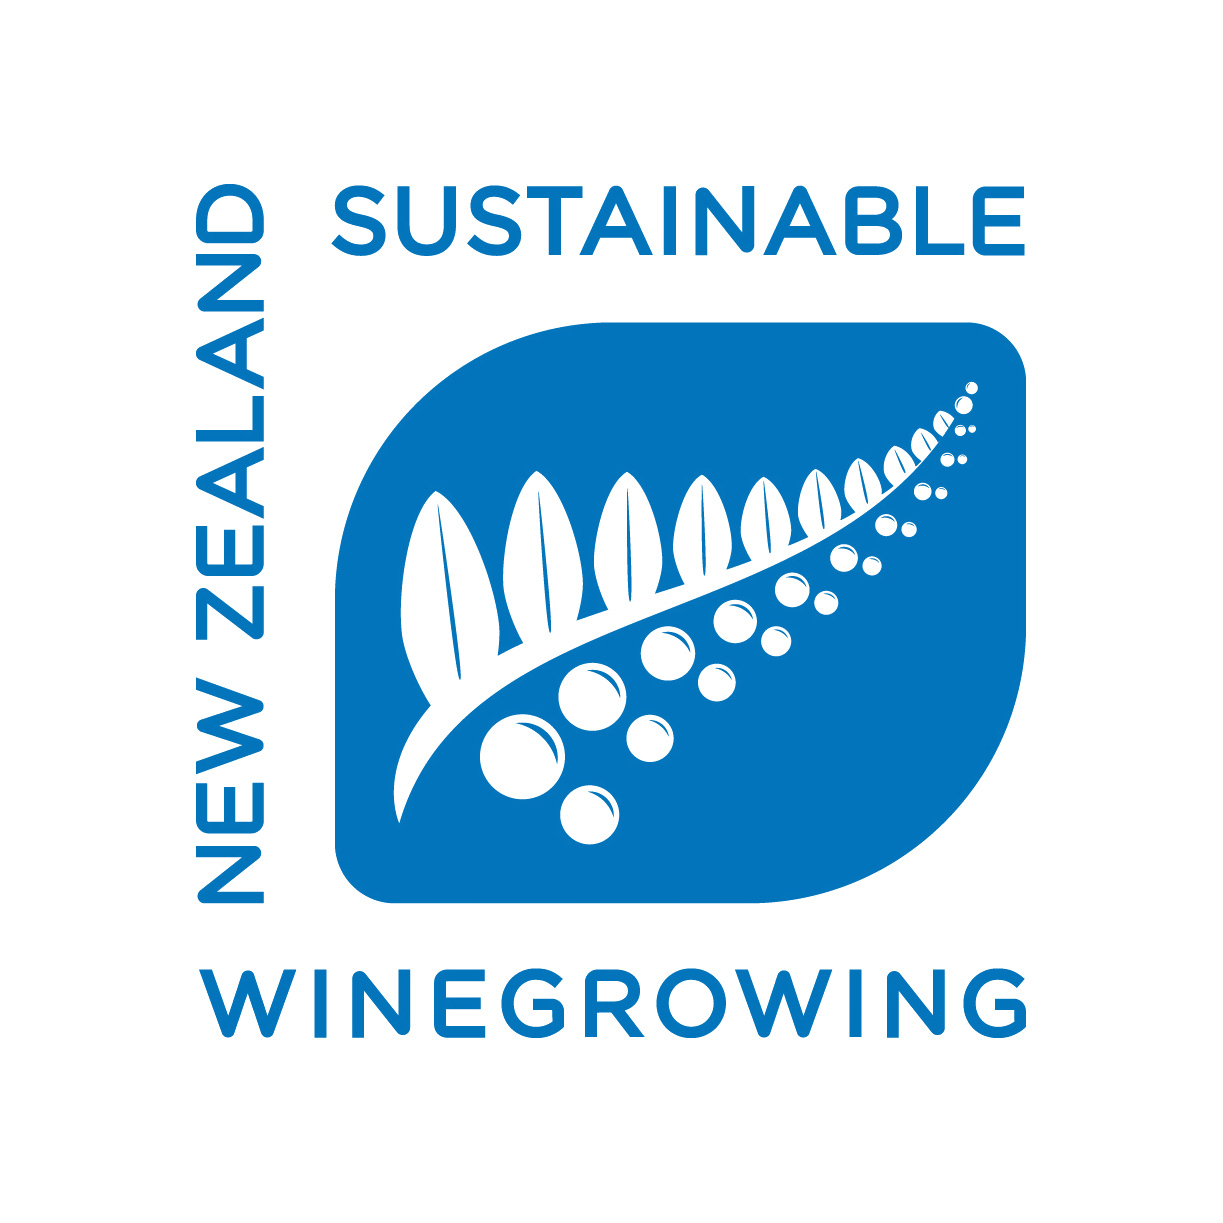 Sustainable winegrowing in New Zealand